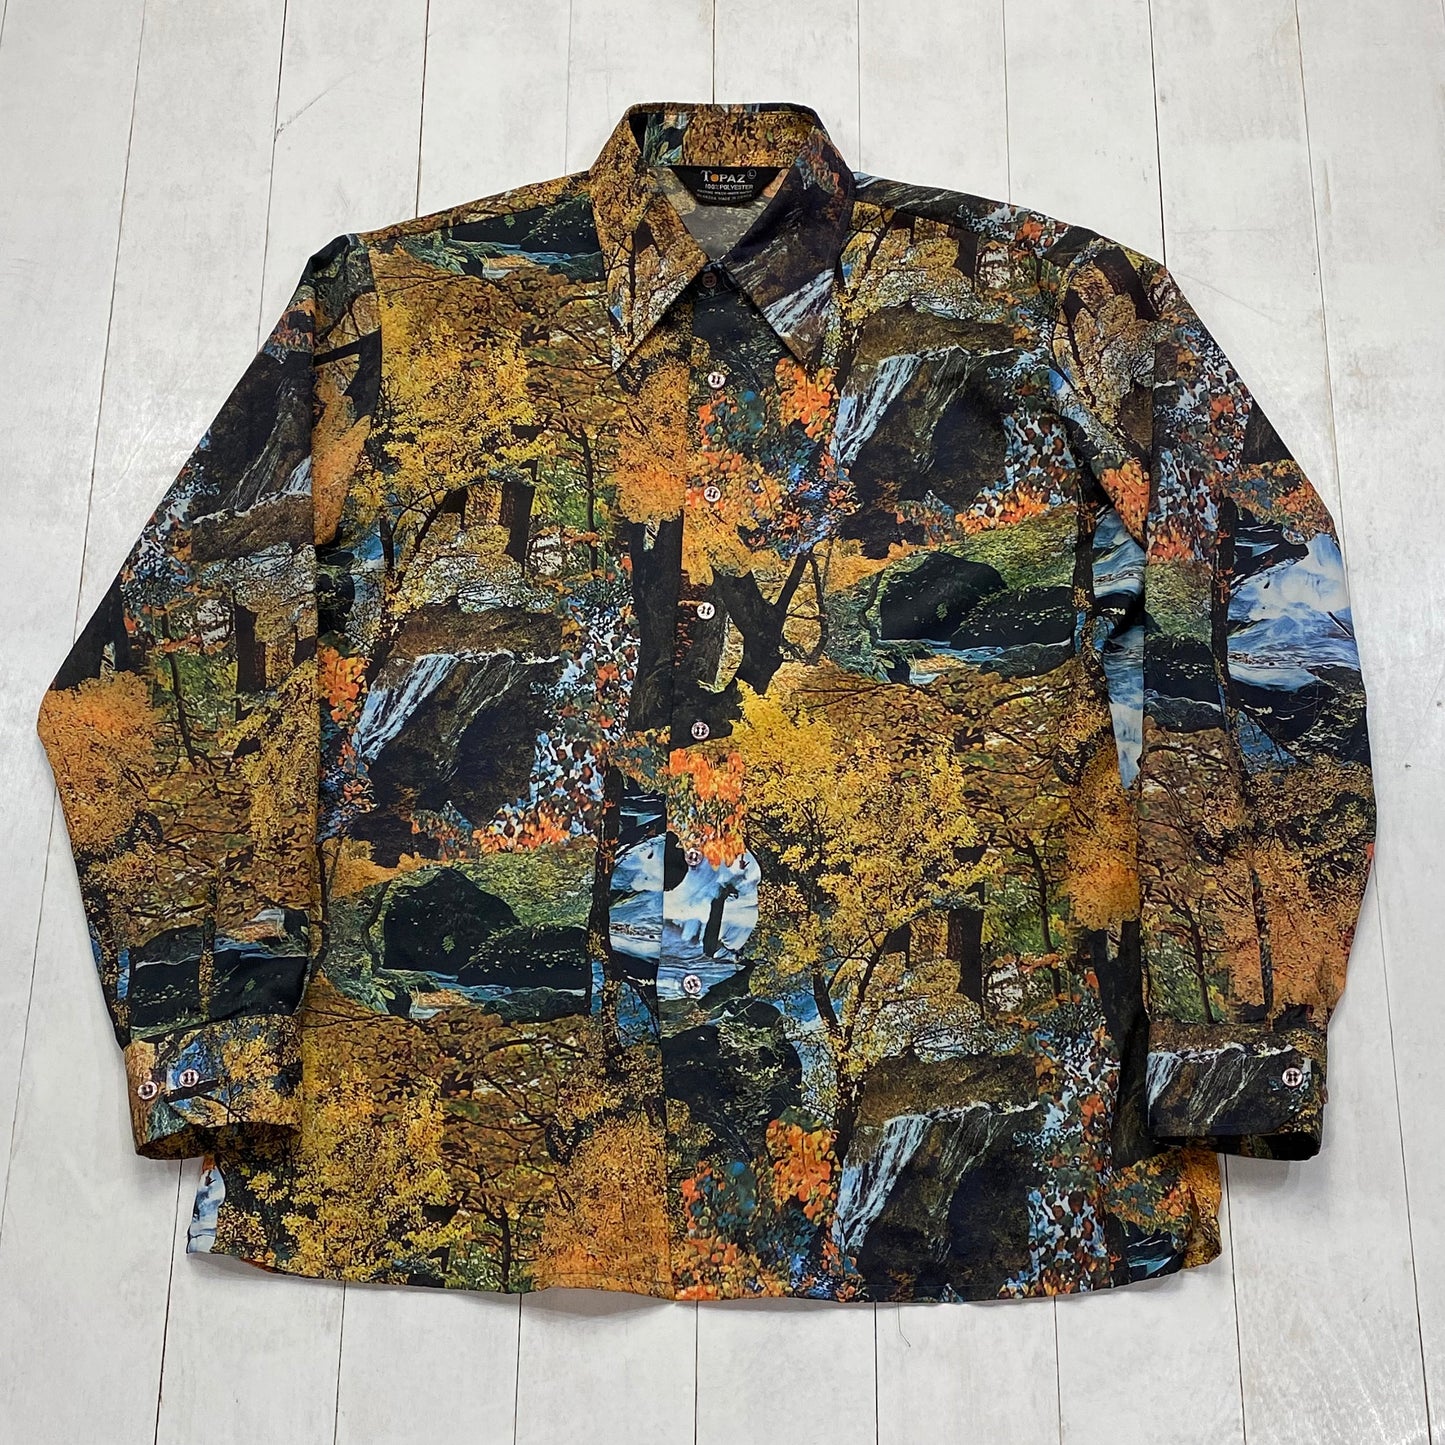 1970s/1980s Topaz Autumn Leaves Forest Photo Print Polyester Disco Shirt Size L/XL